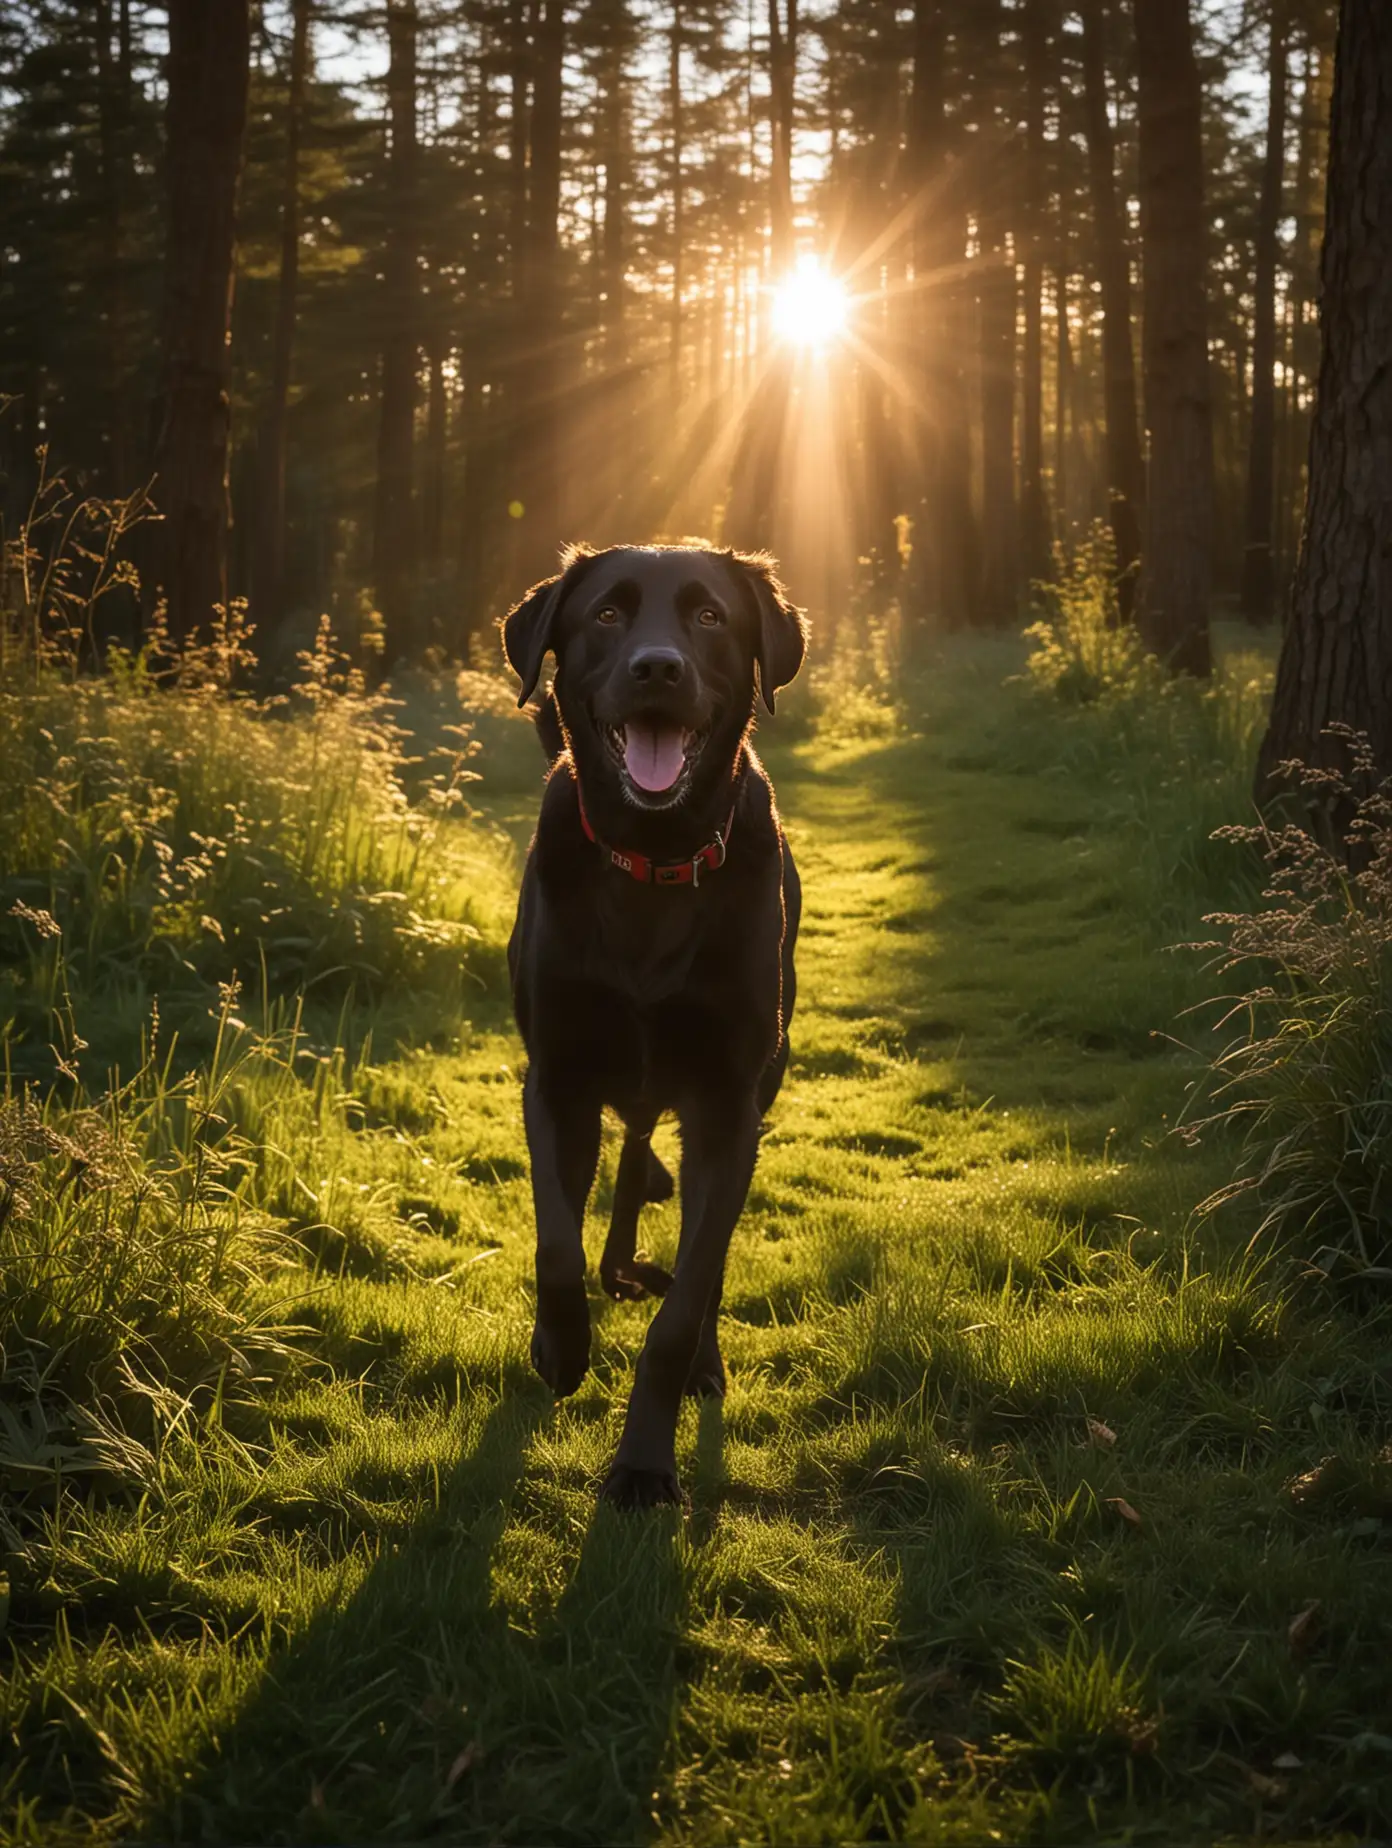 Black-Labrador-Dog-Running-on-Green-Lawn-with-Sunlight-Filtering-Through-Forest